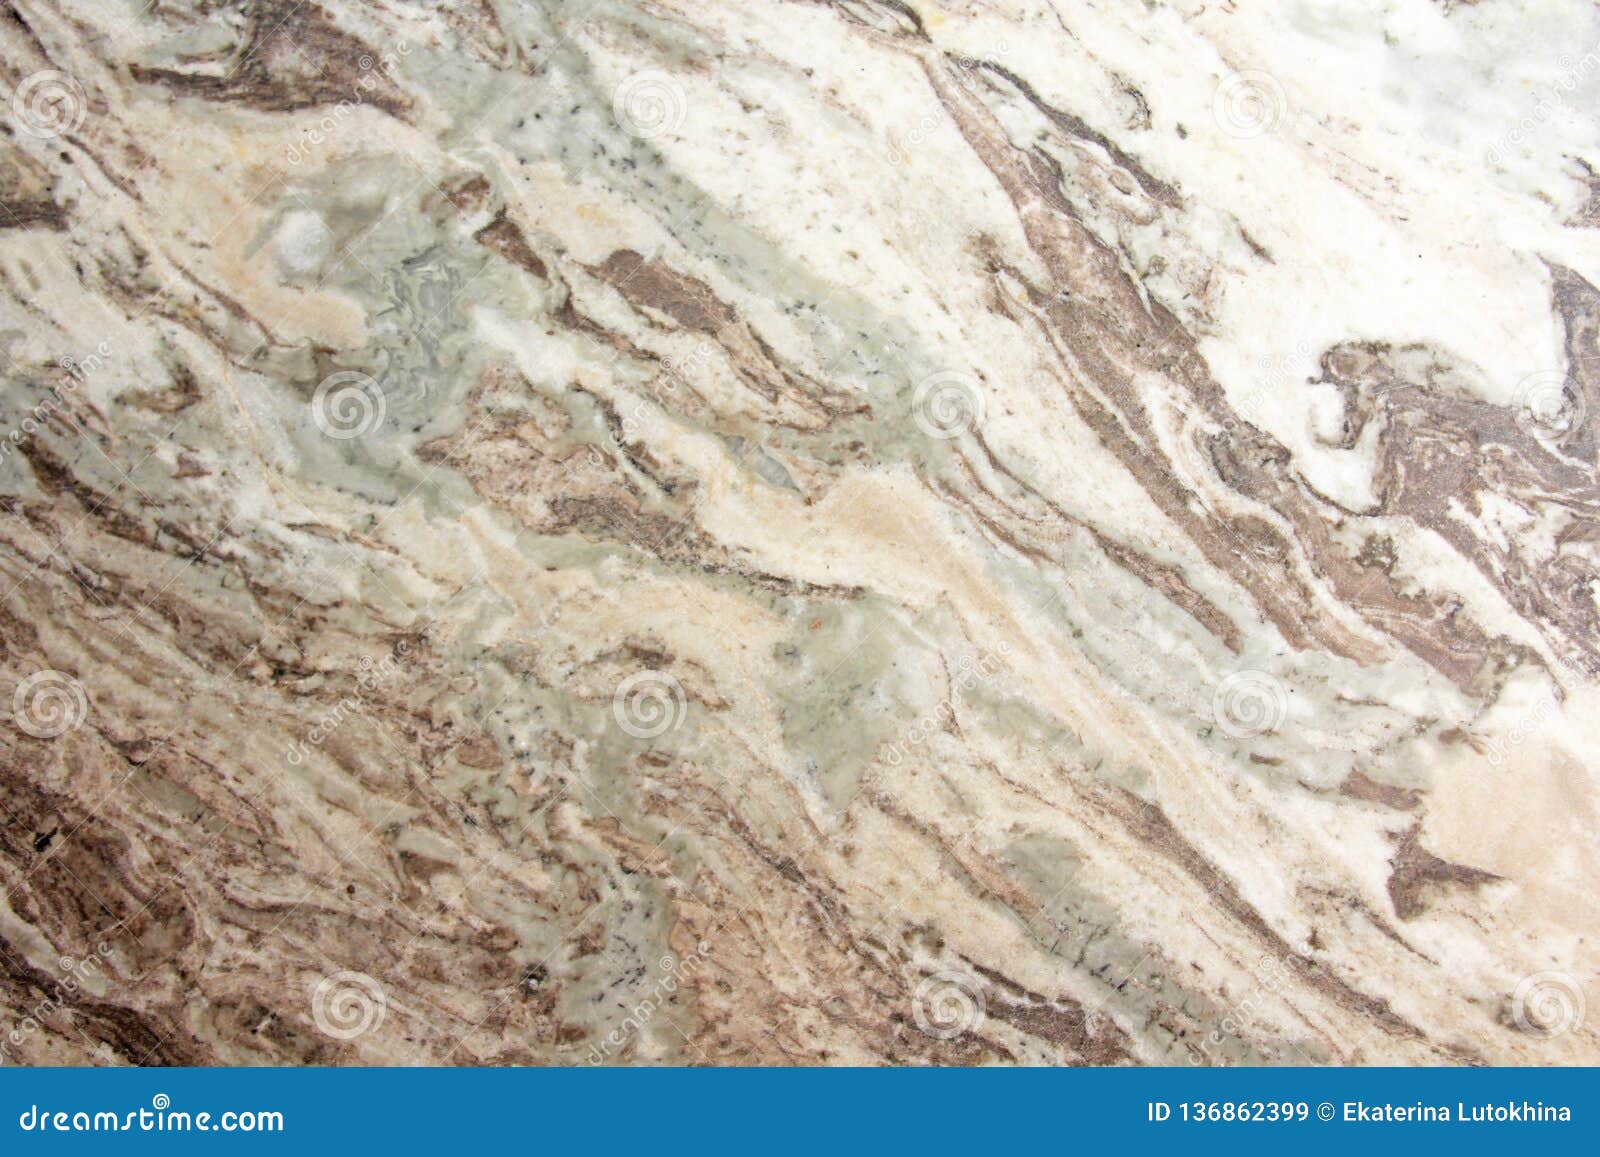 Marble Texture Background. Abstract Beige And Green Marble ...